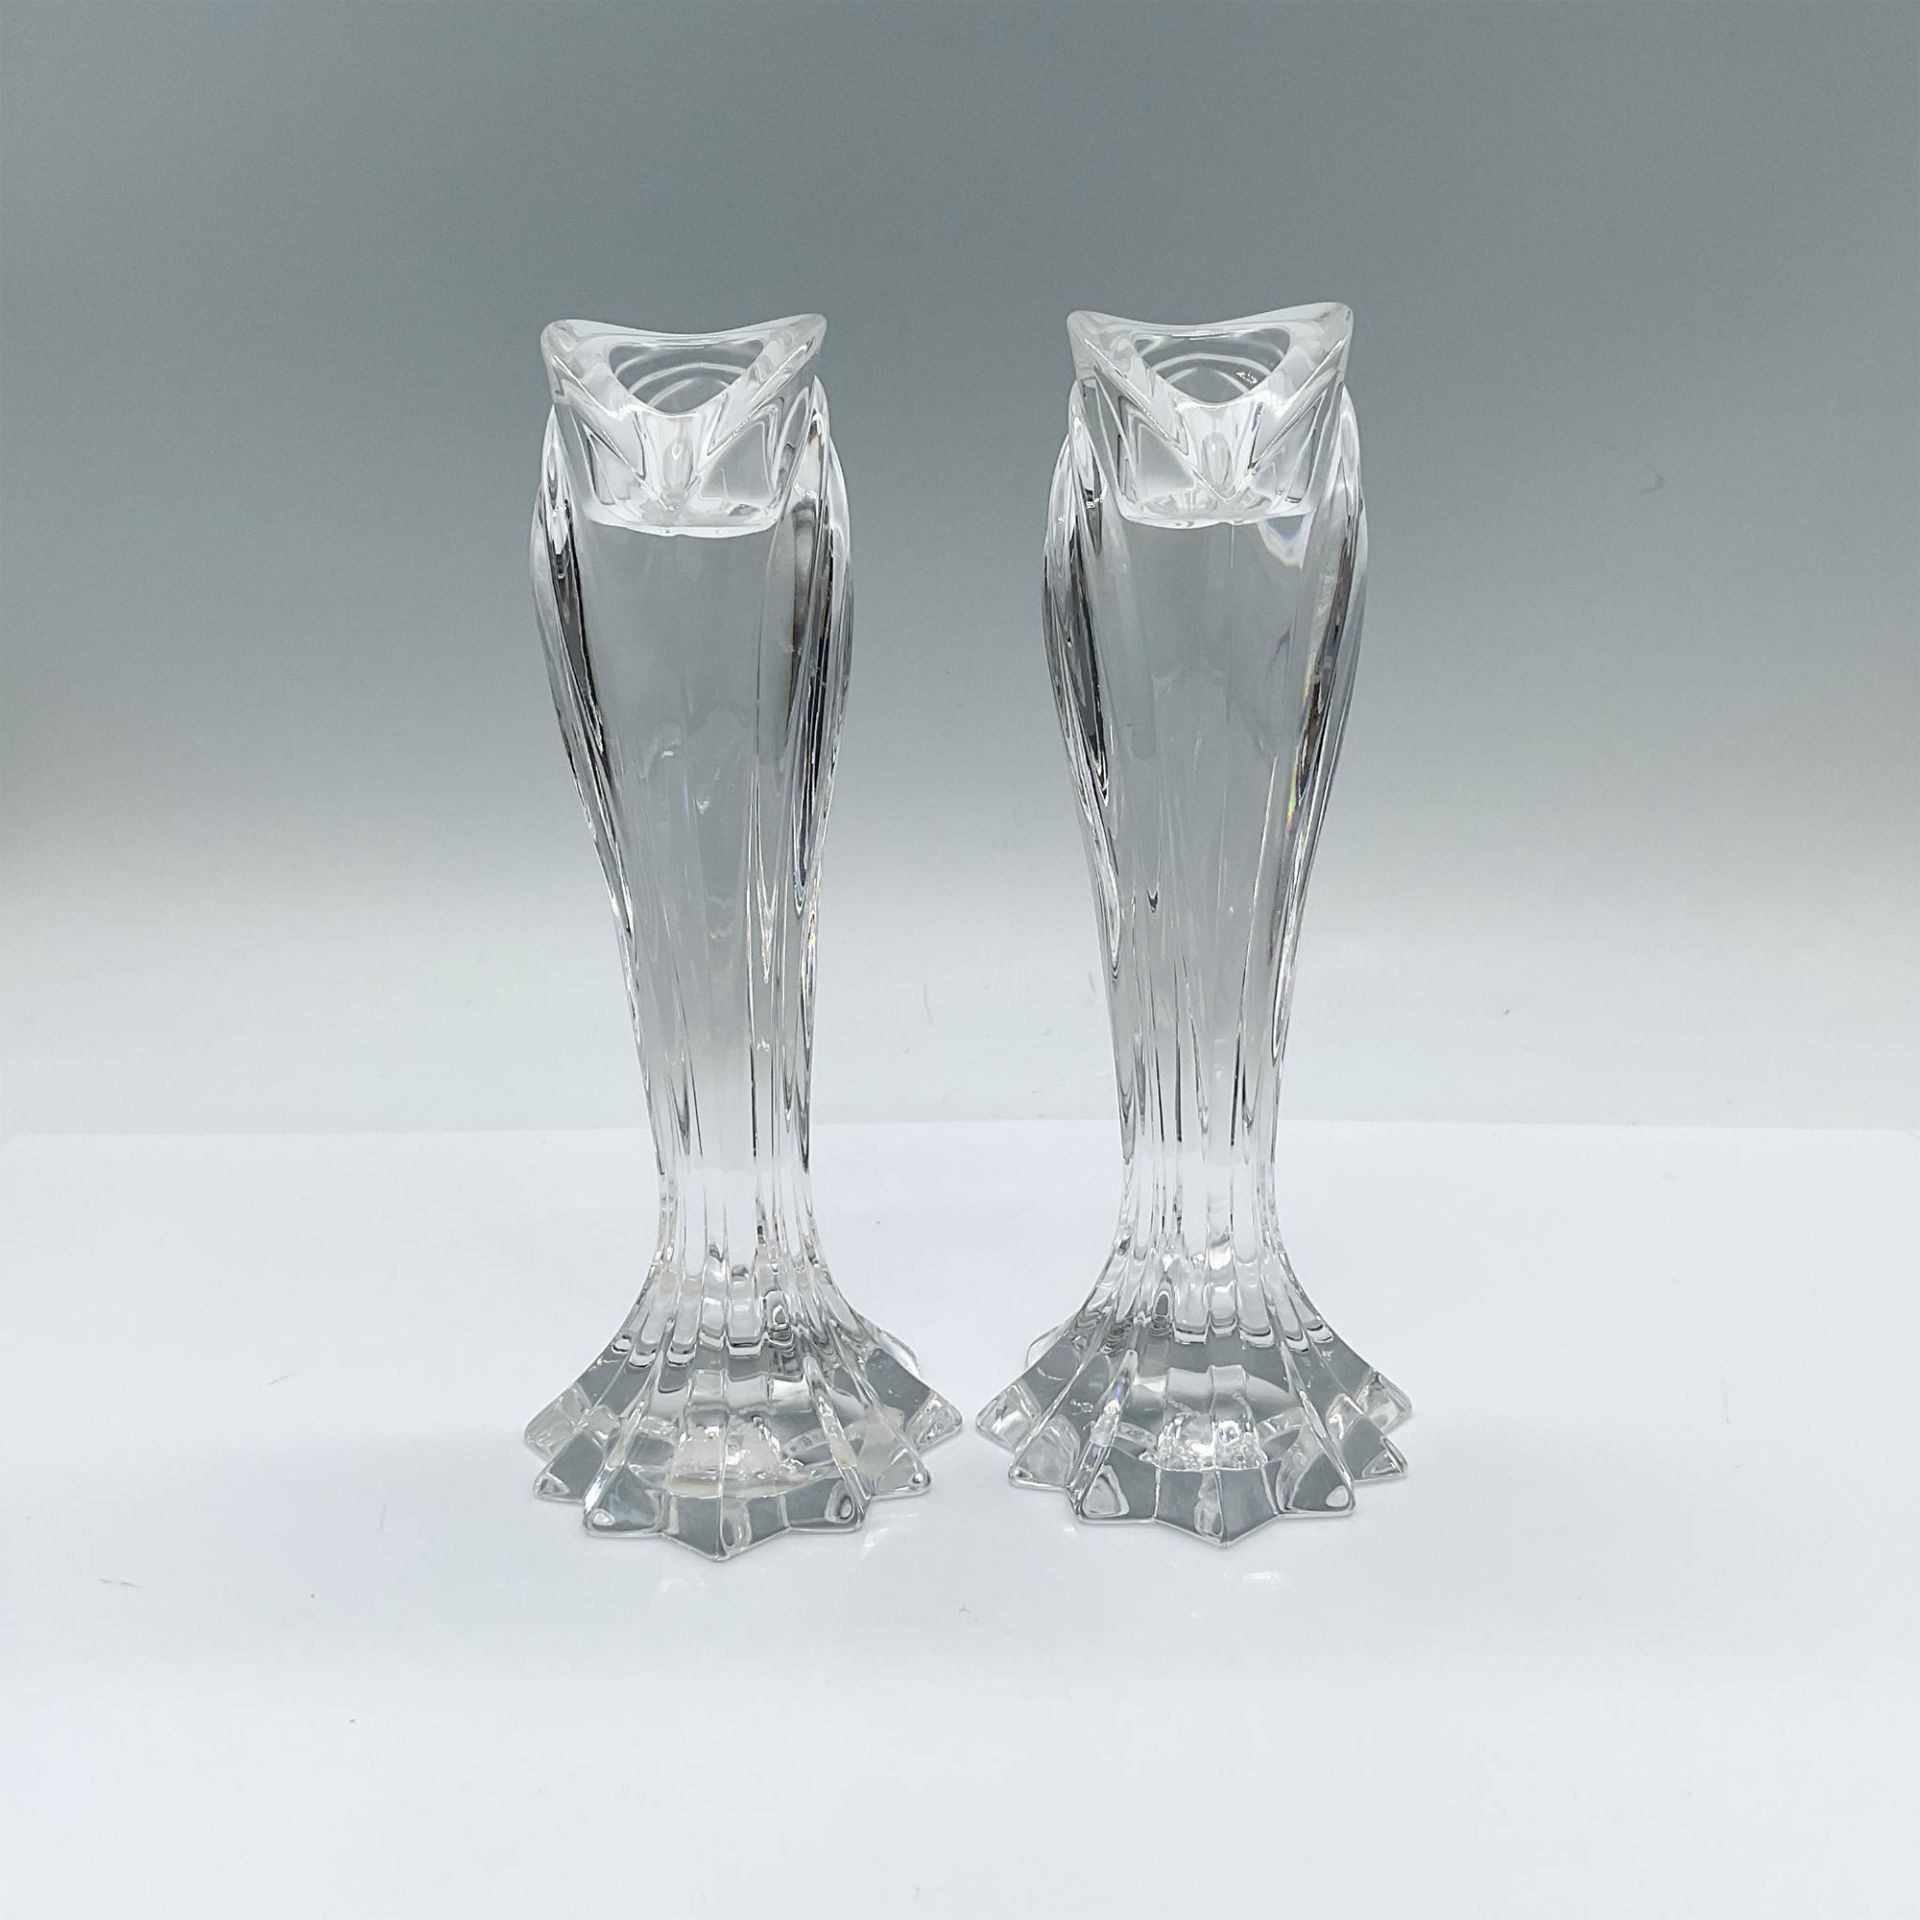 Pair of Lenox Glass Candlestick Holders, Artic Bloom